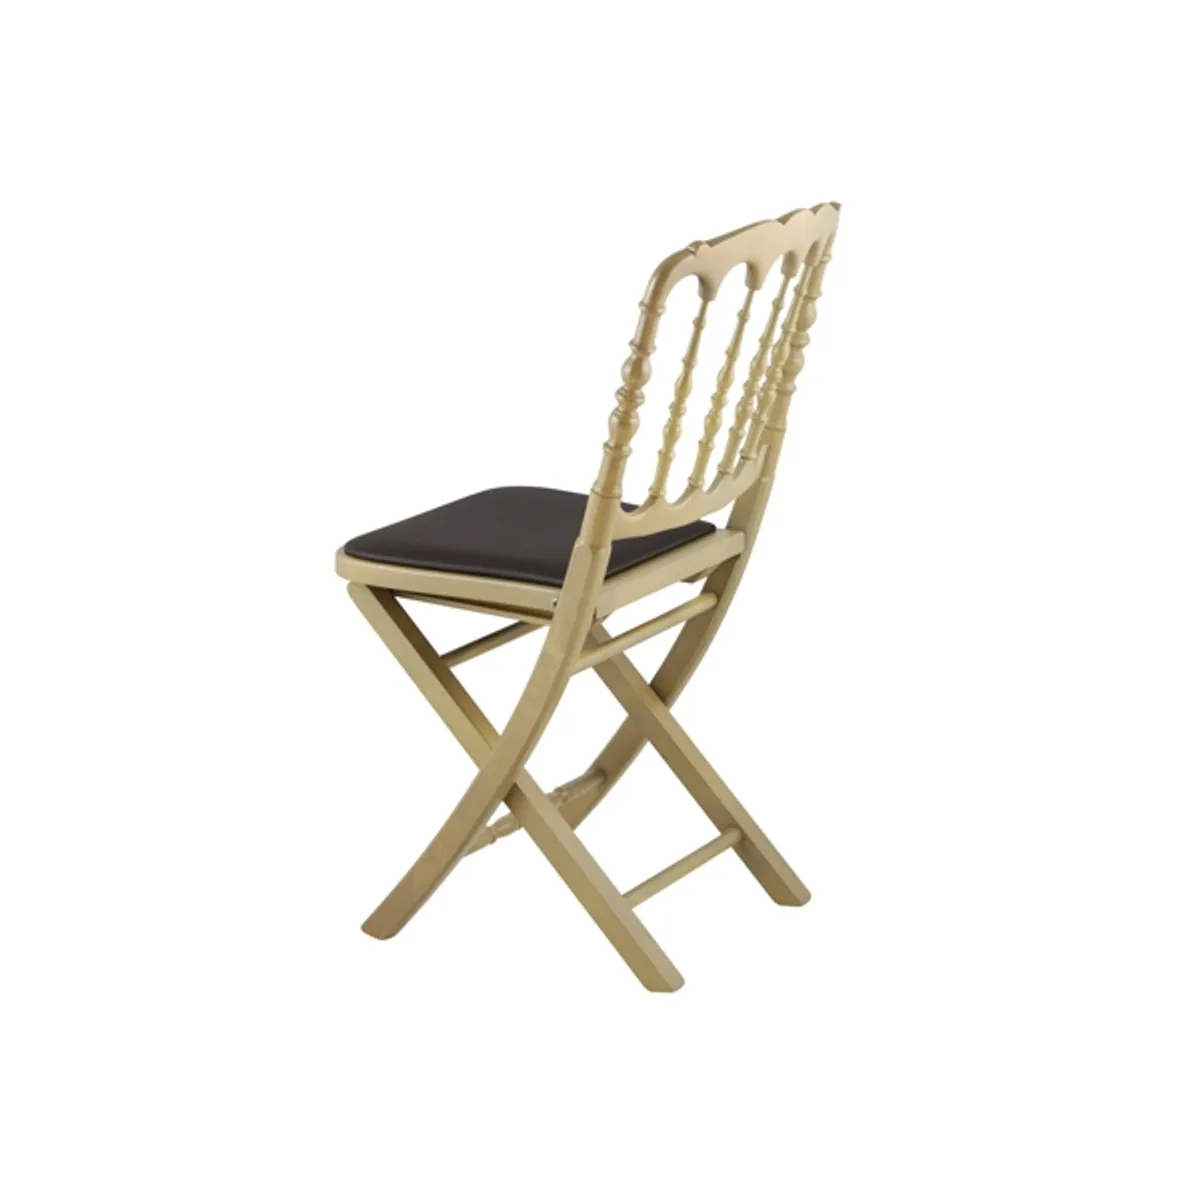 Antoinette folding chair Inside Out Contracts4